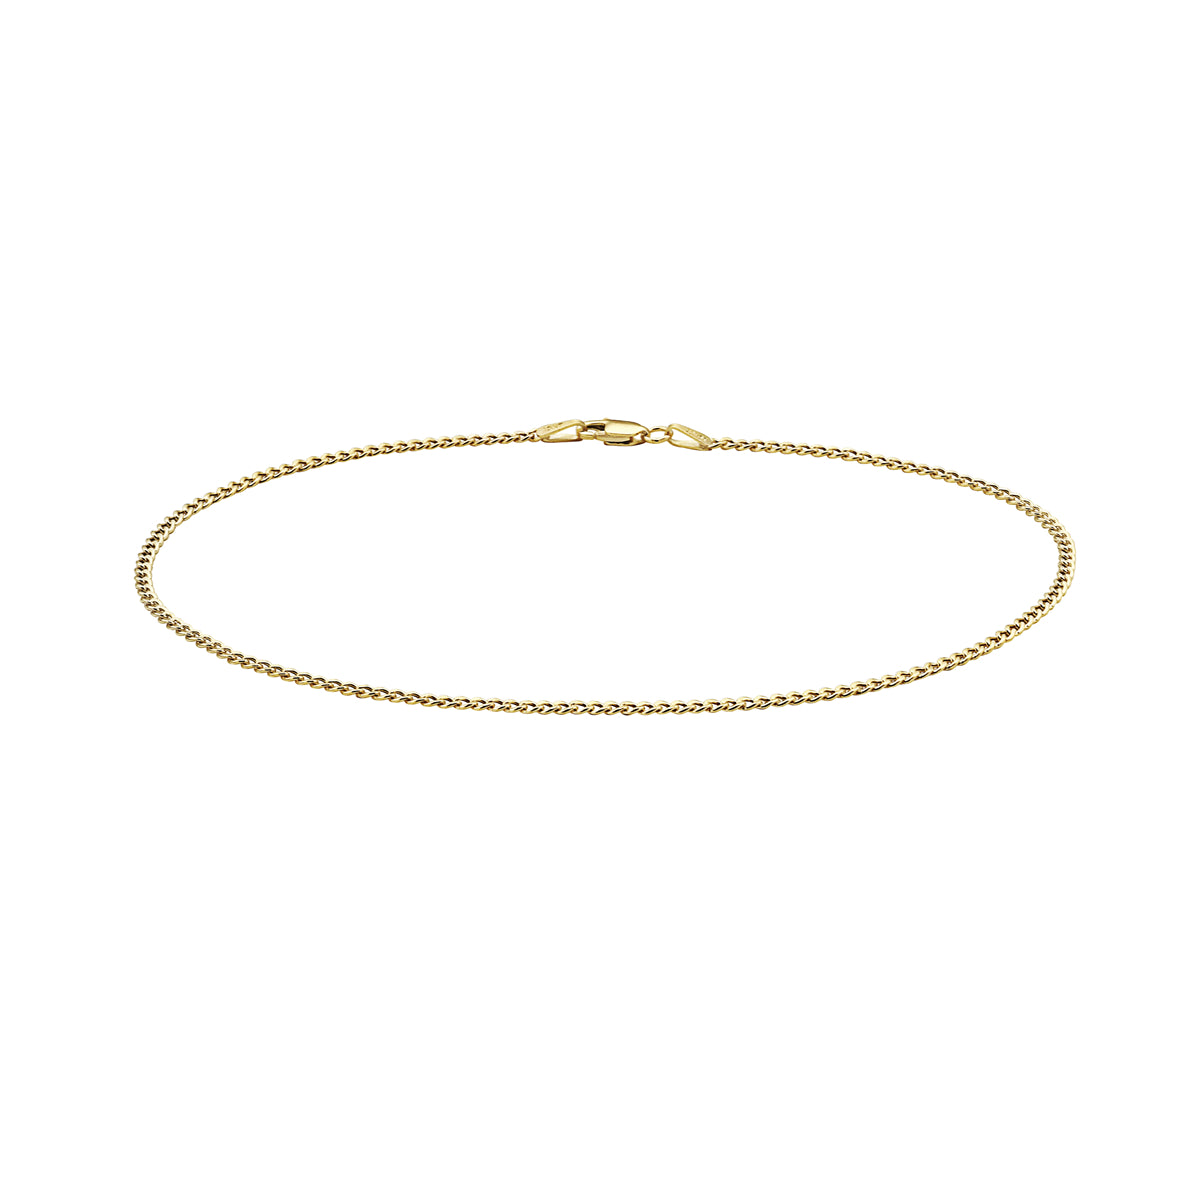 10K Gold Cuban/Curb Link Chain Anklet